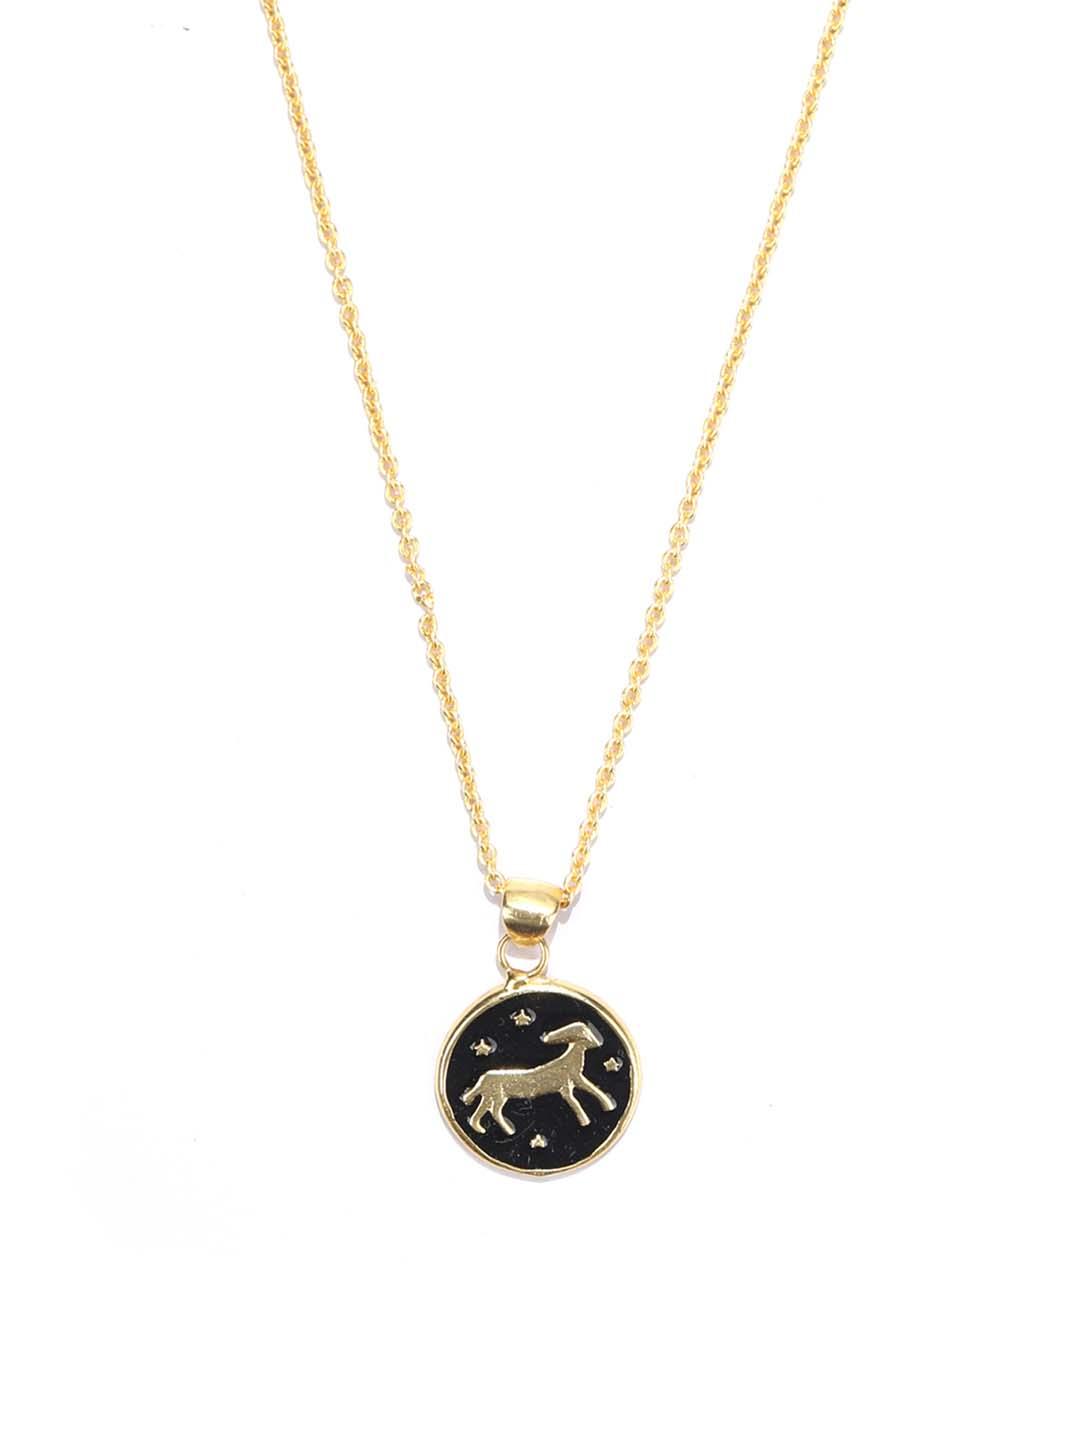 Women's Capricorn Zodiac Sign Black Gold Plated Necklace - Priyaasi - Indiakreations